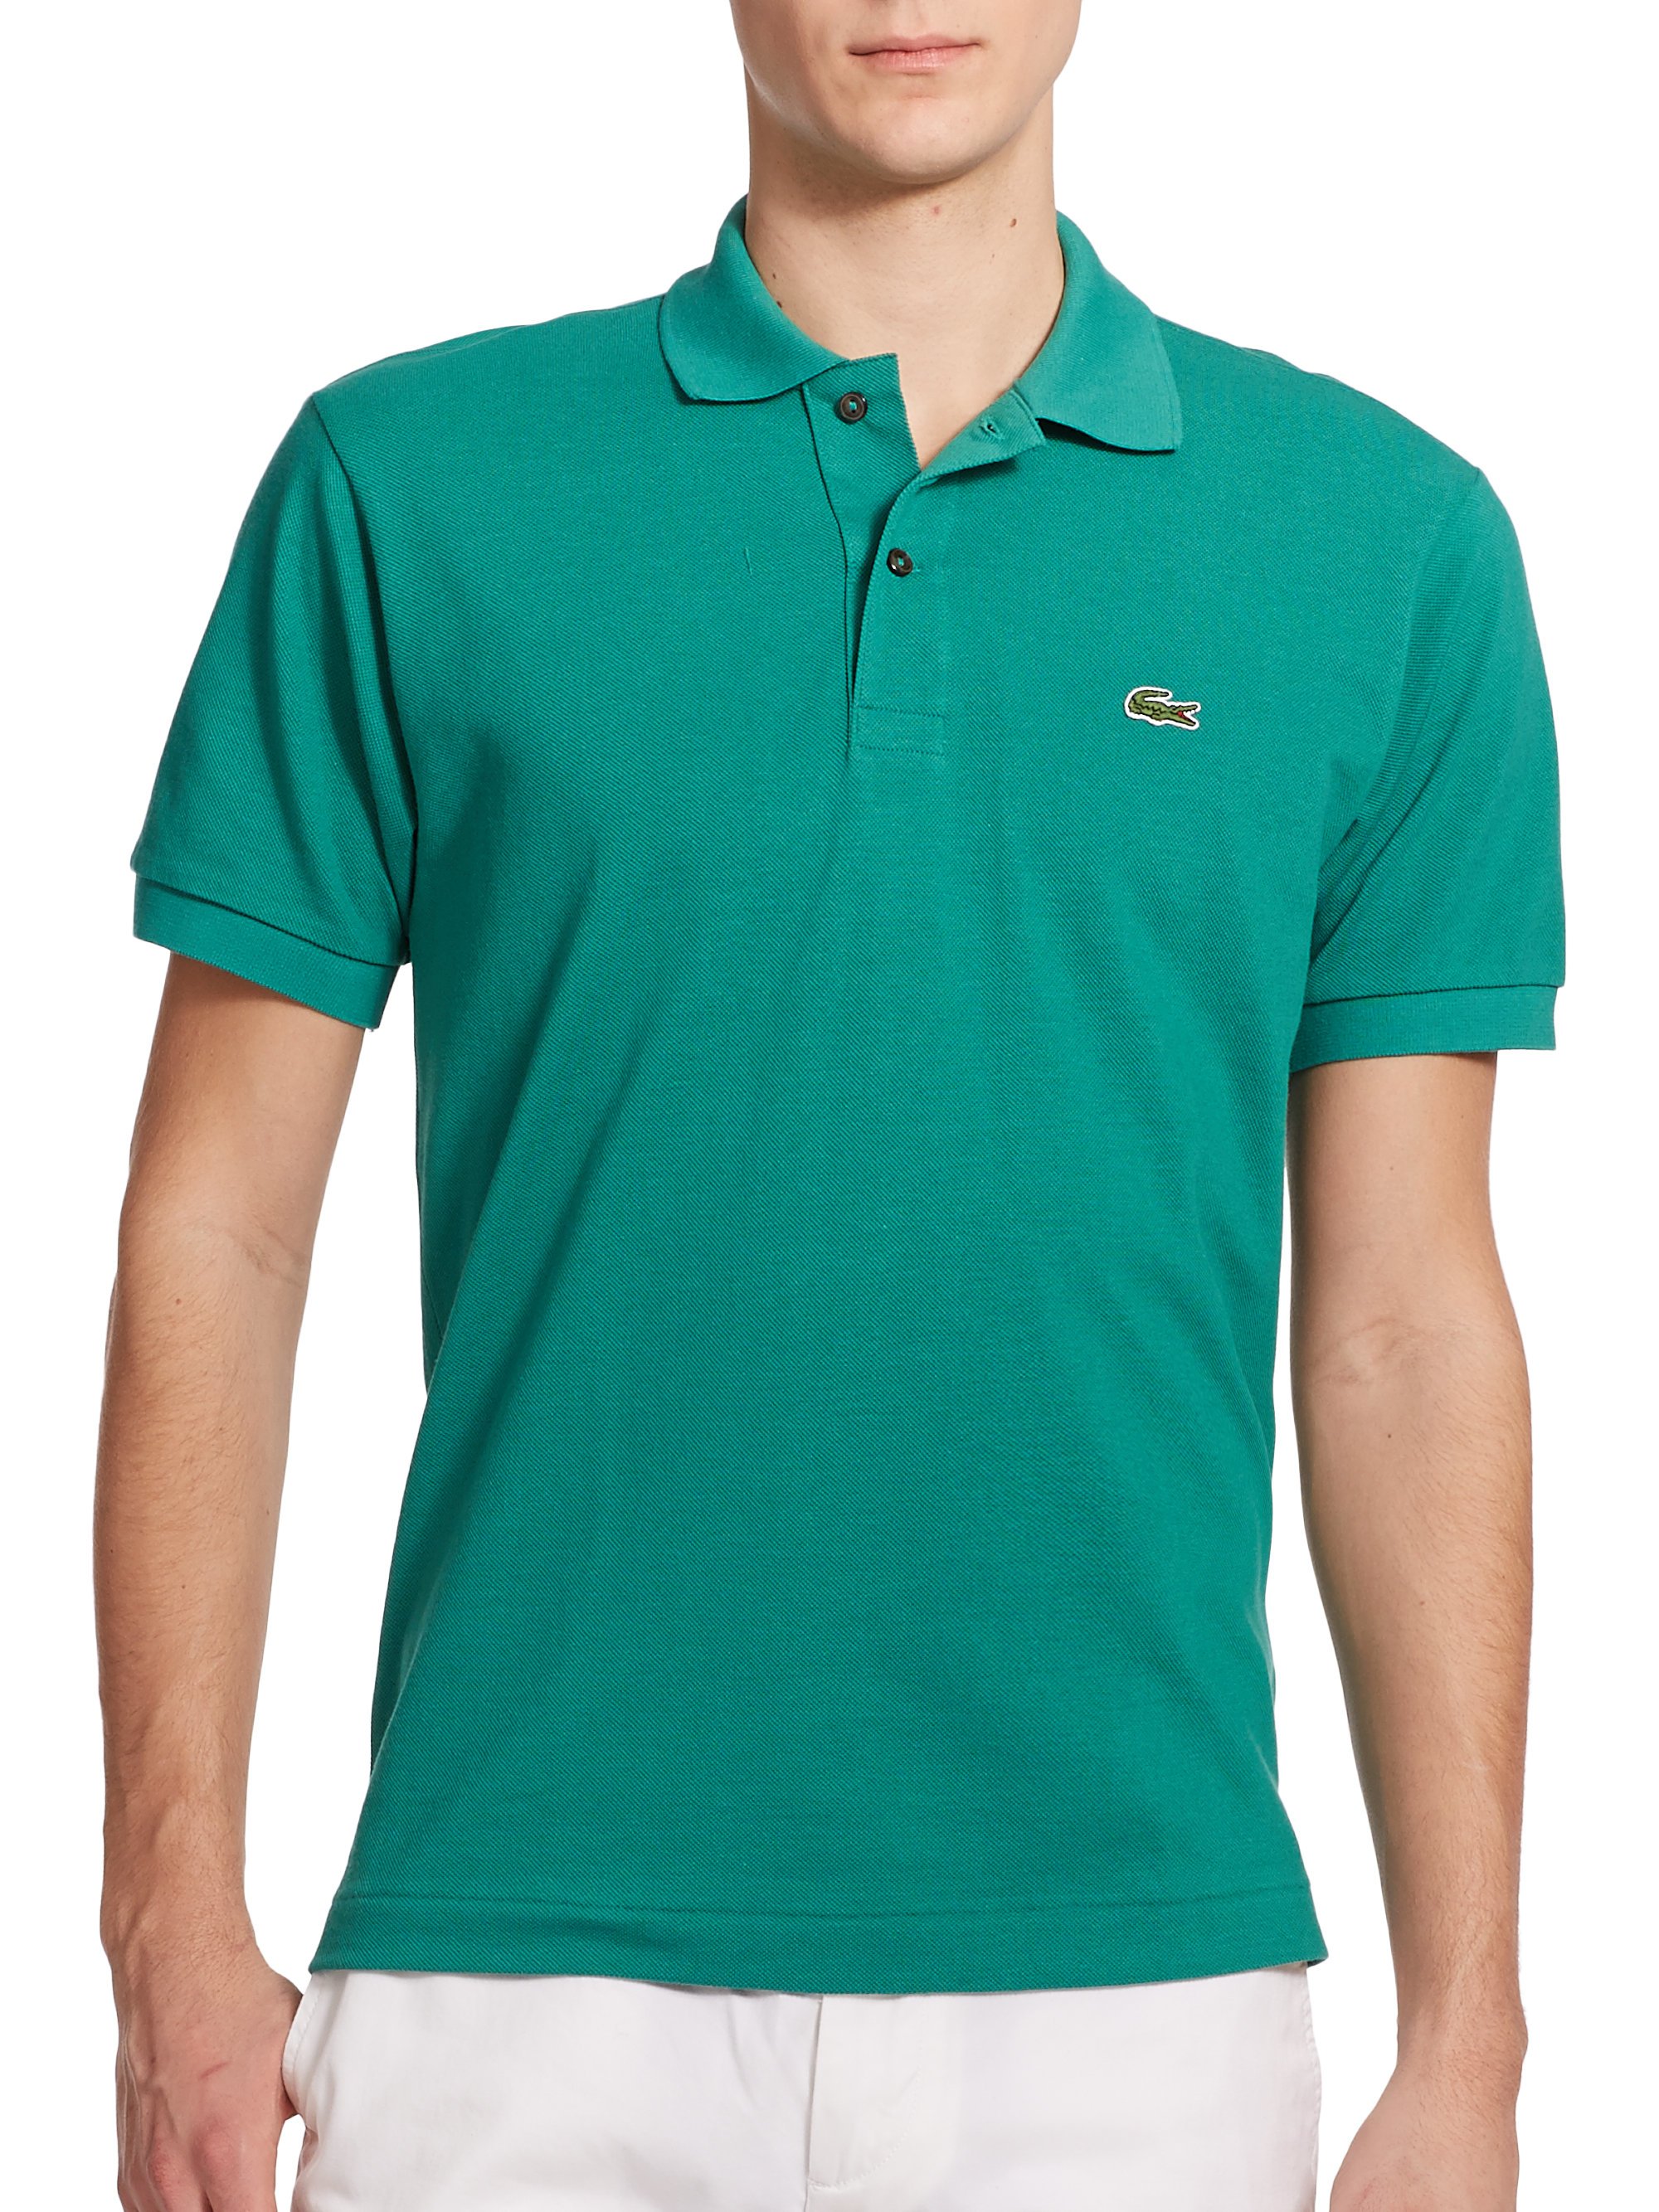 Lyst - Lacoste Polo Shirt in Blue for Men